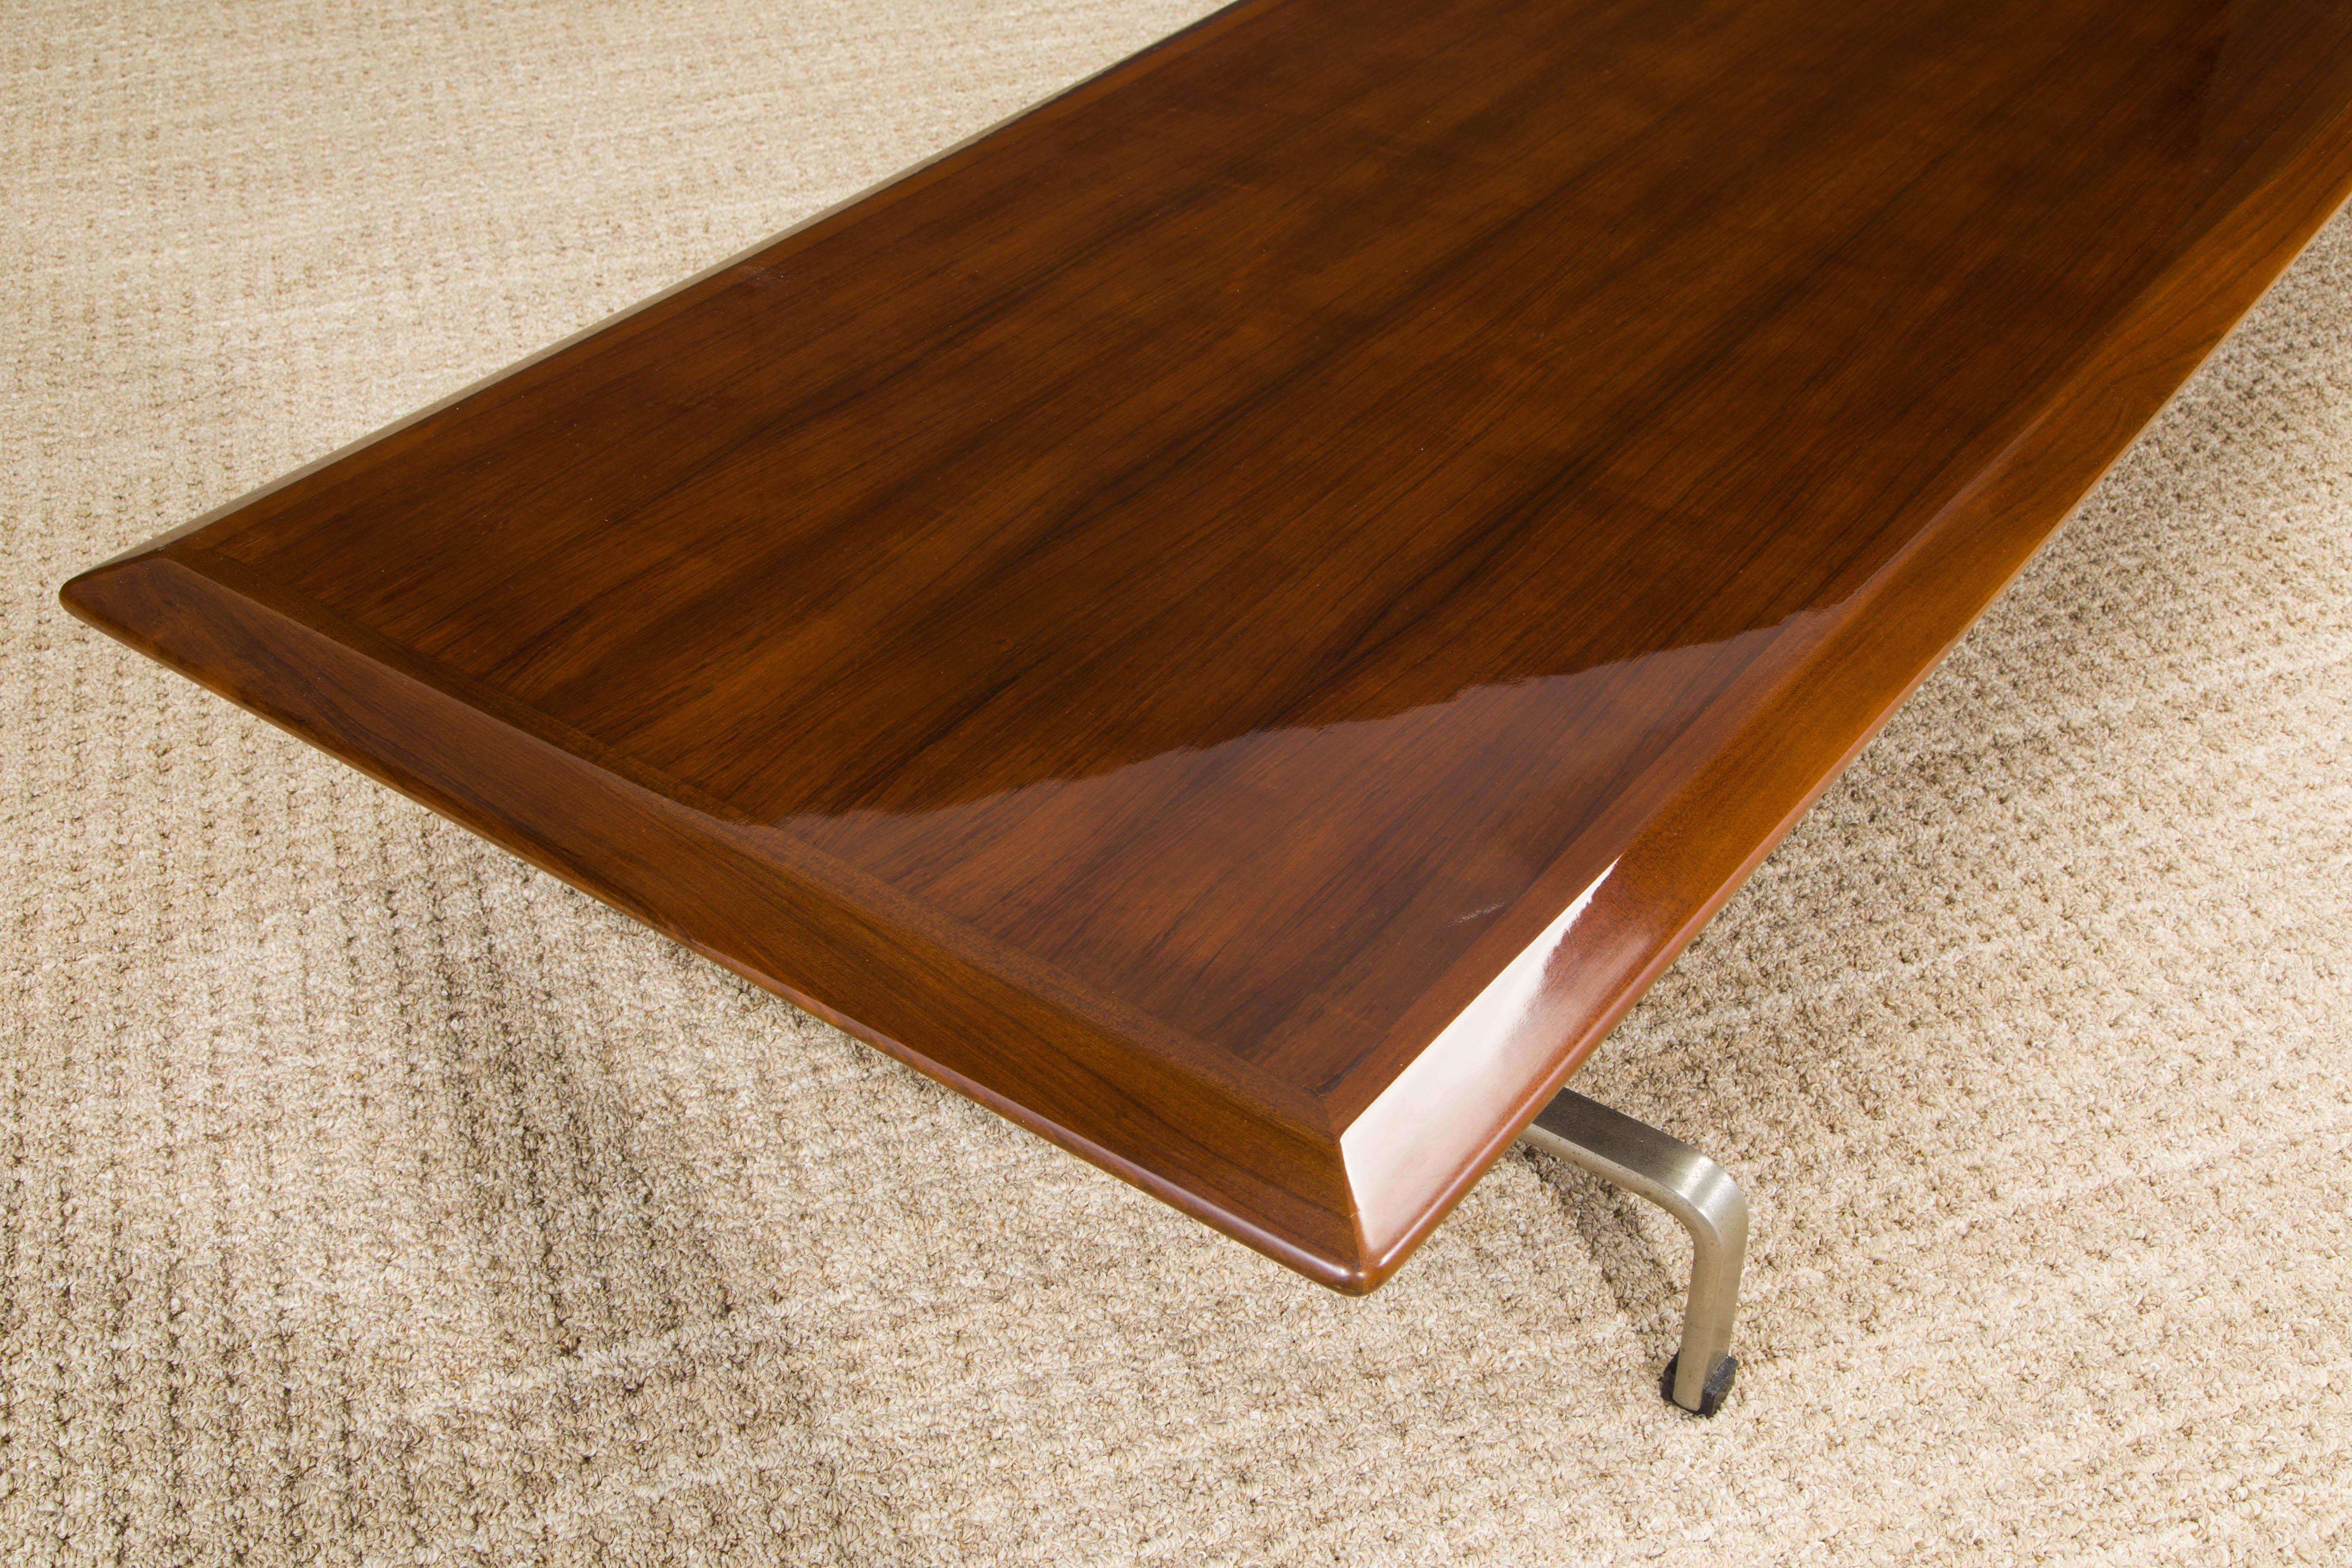 Poul Kjaerholm PK-31 Coffee Table with Rosewood Top, Rare 4